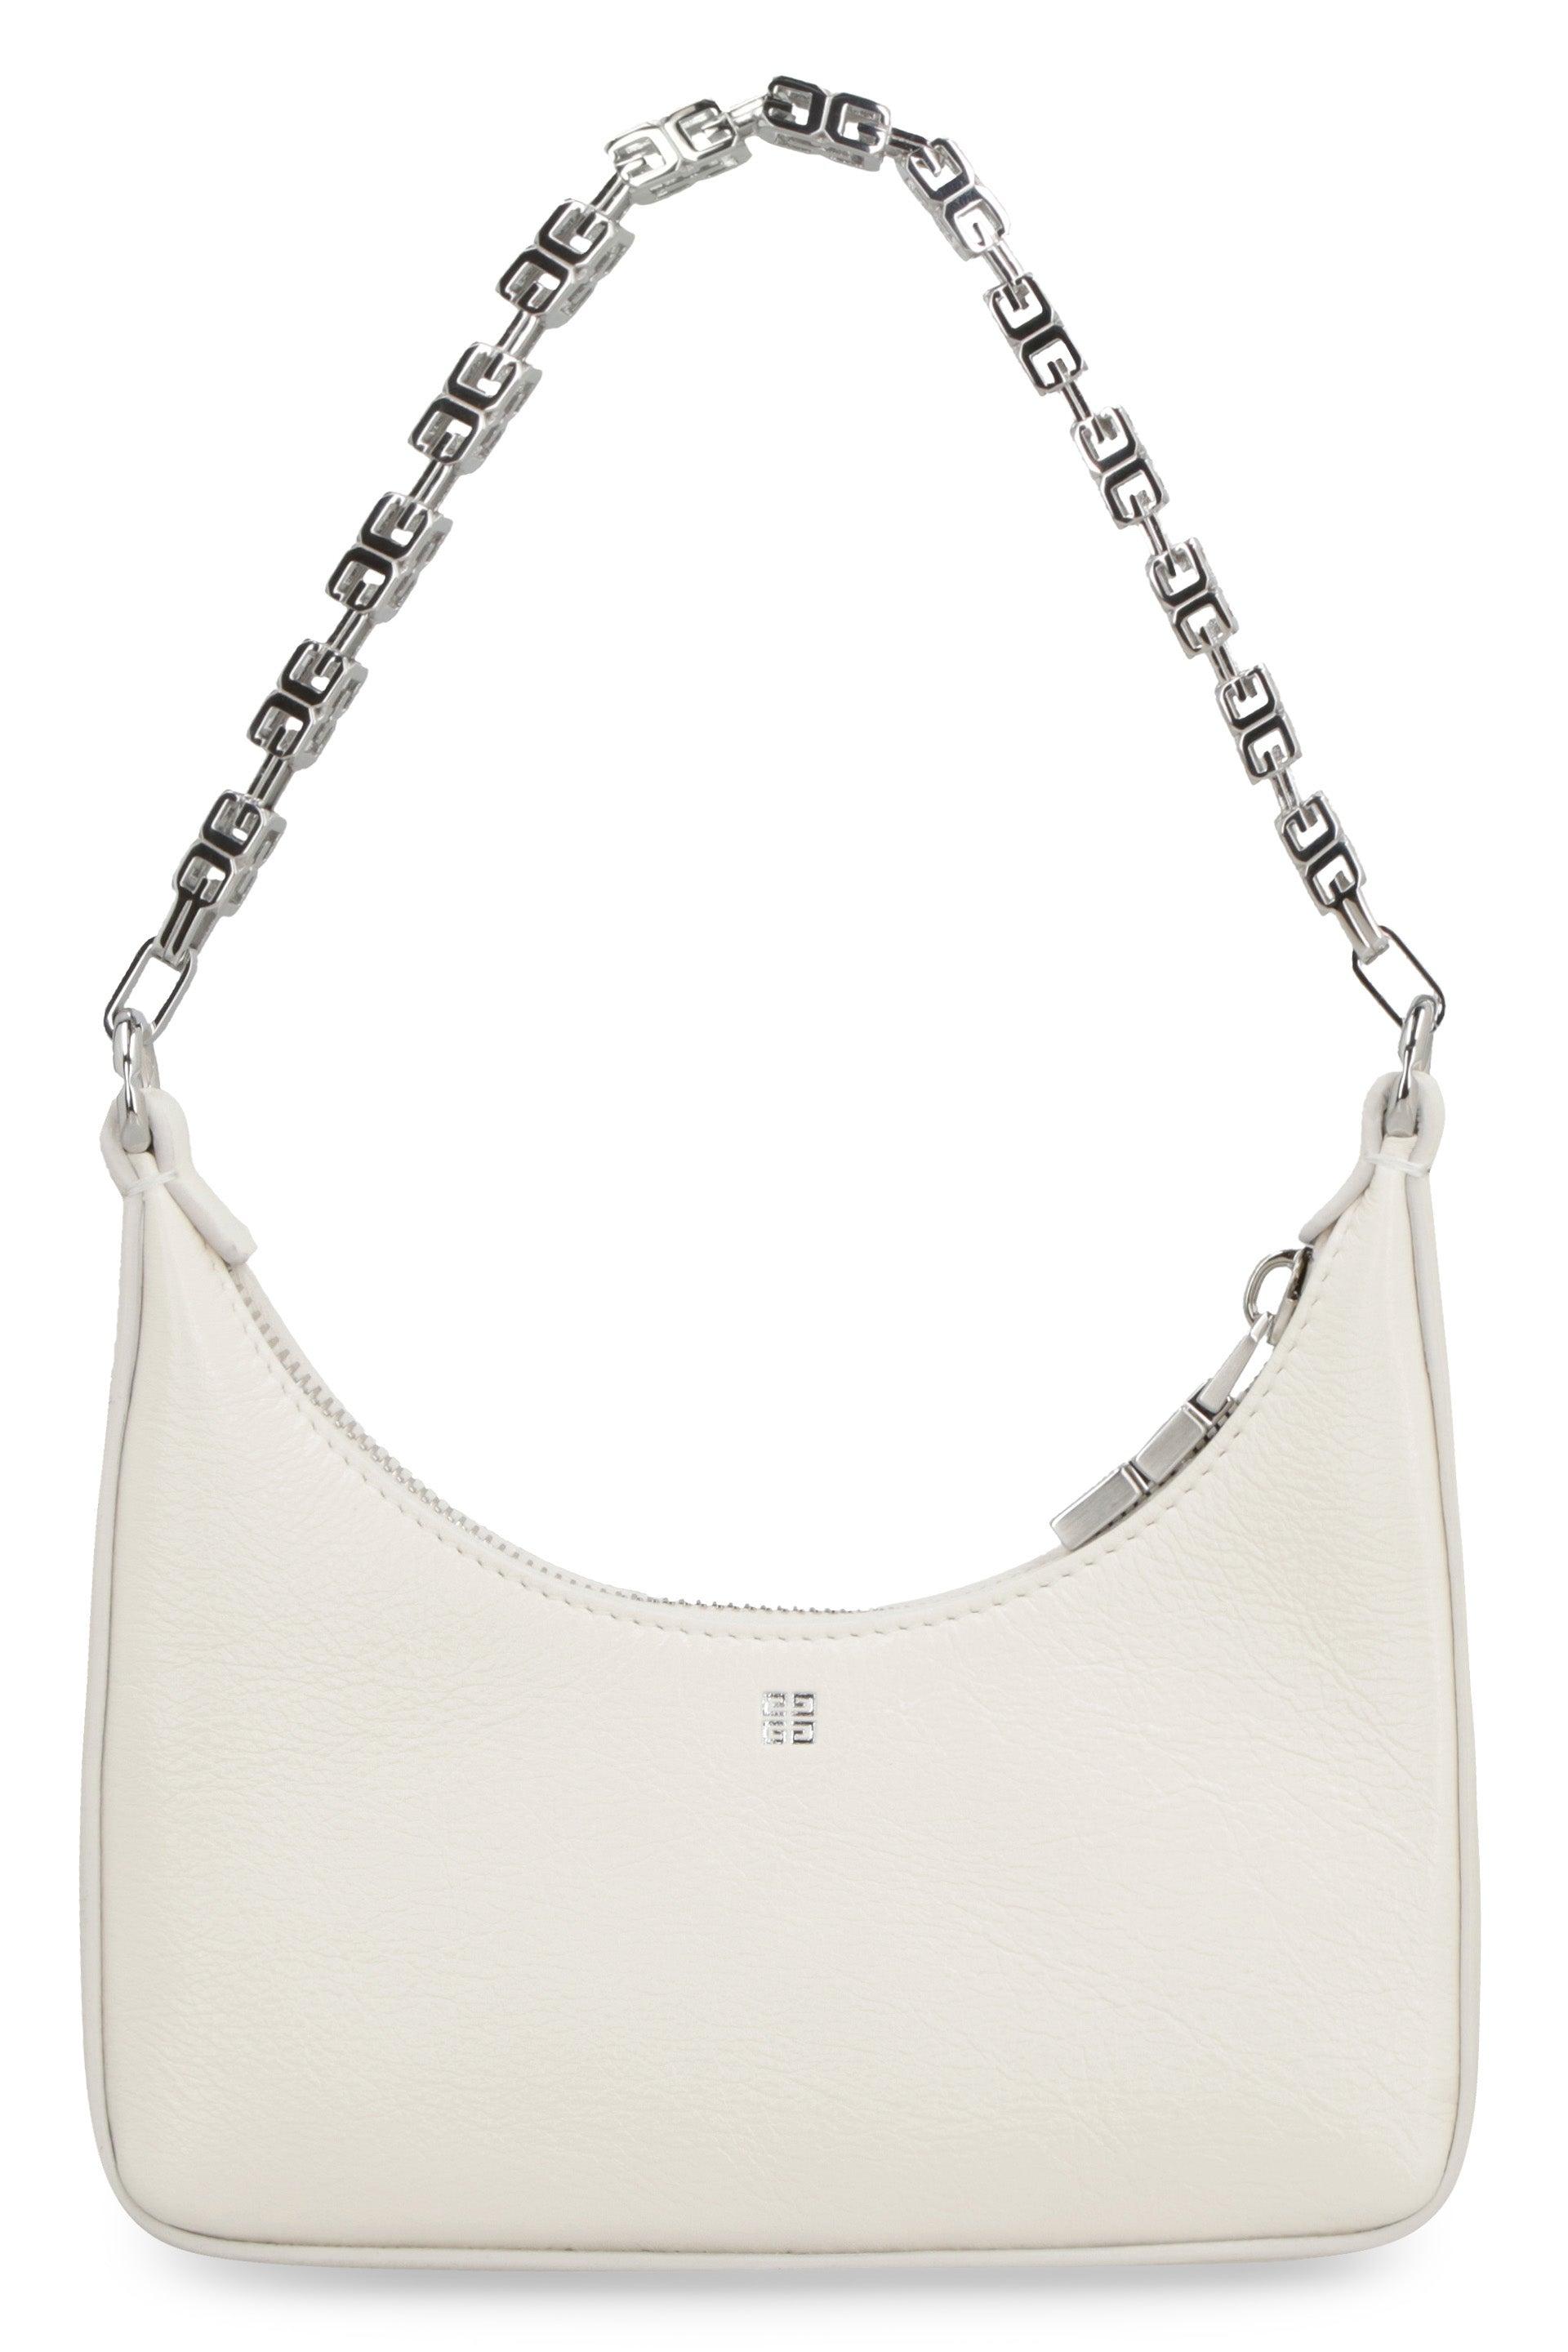 Givenchy Moon Cut-out Leather Mini Bag in White